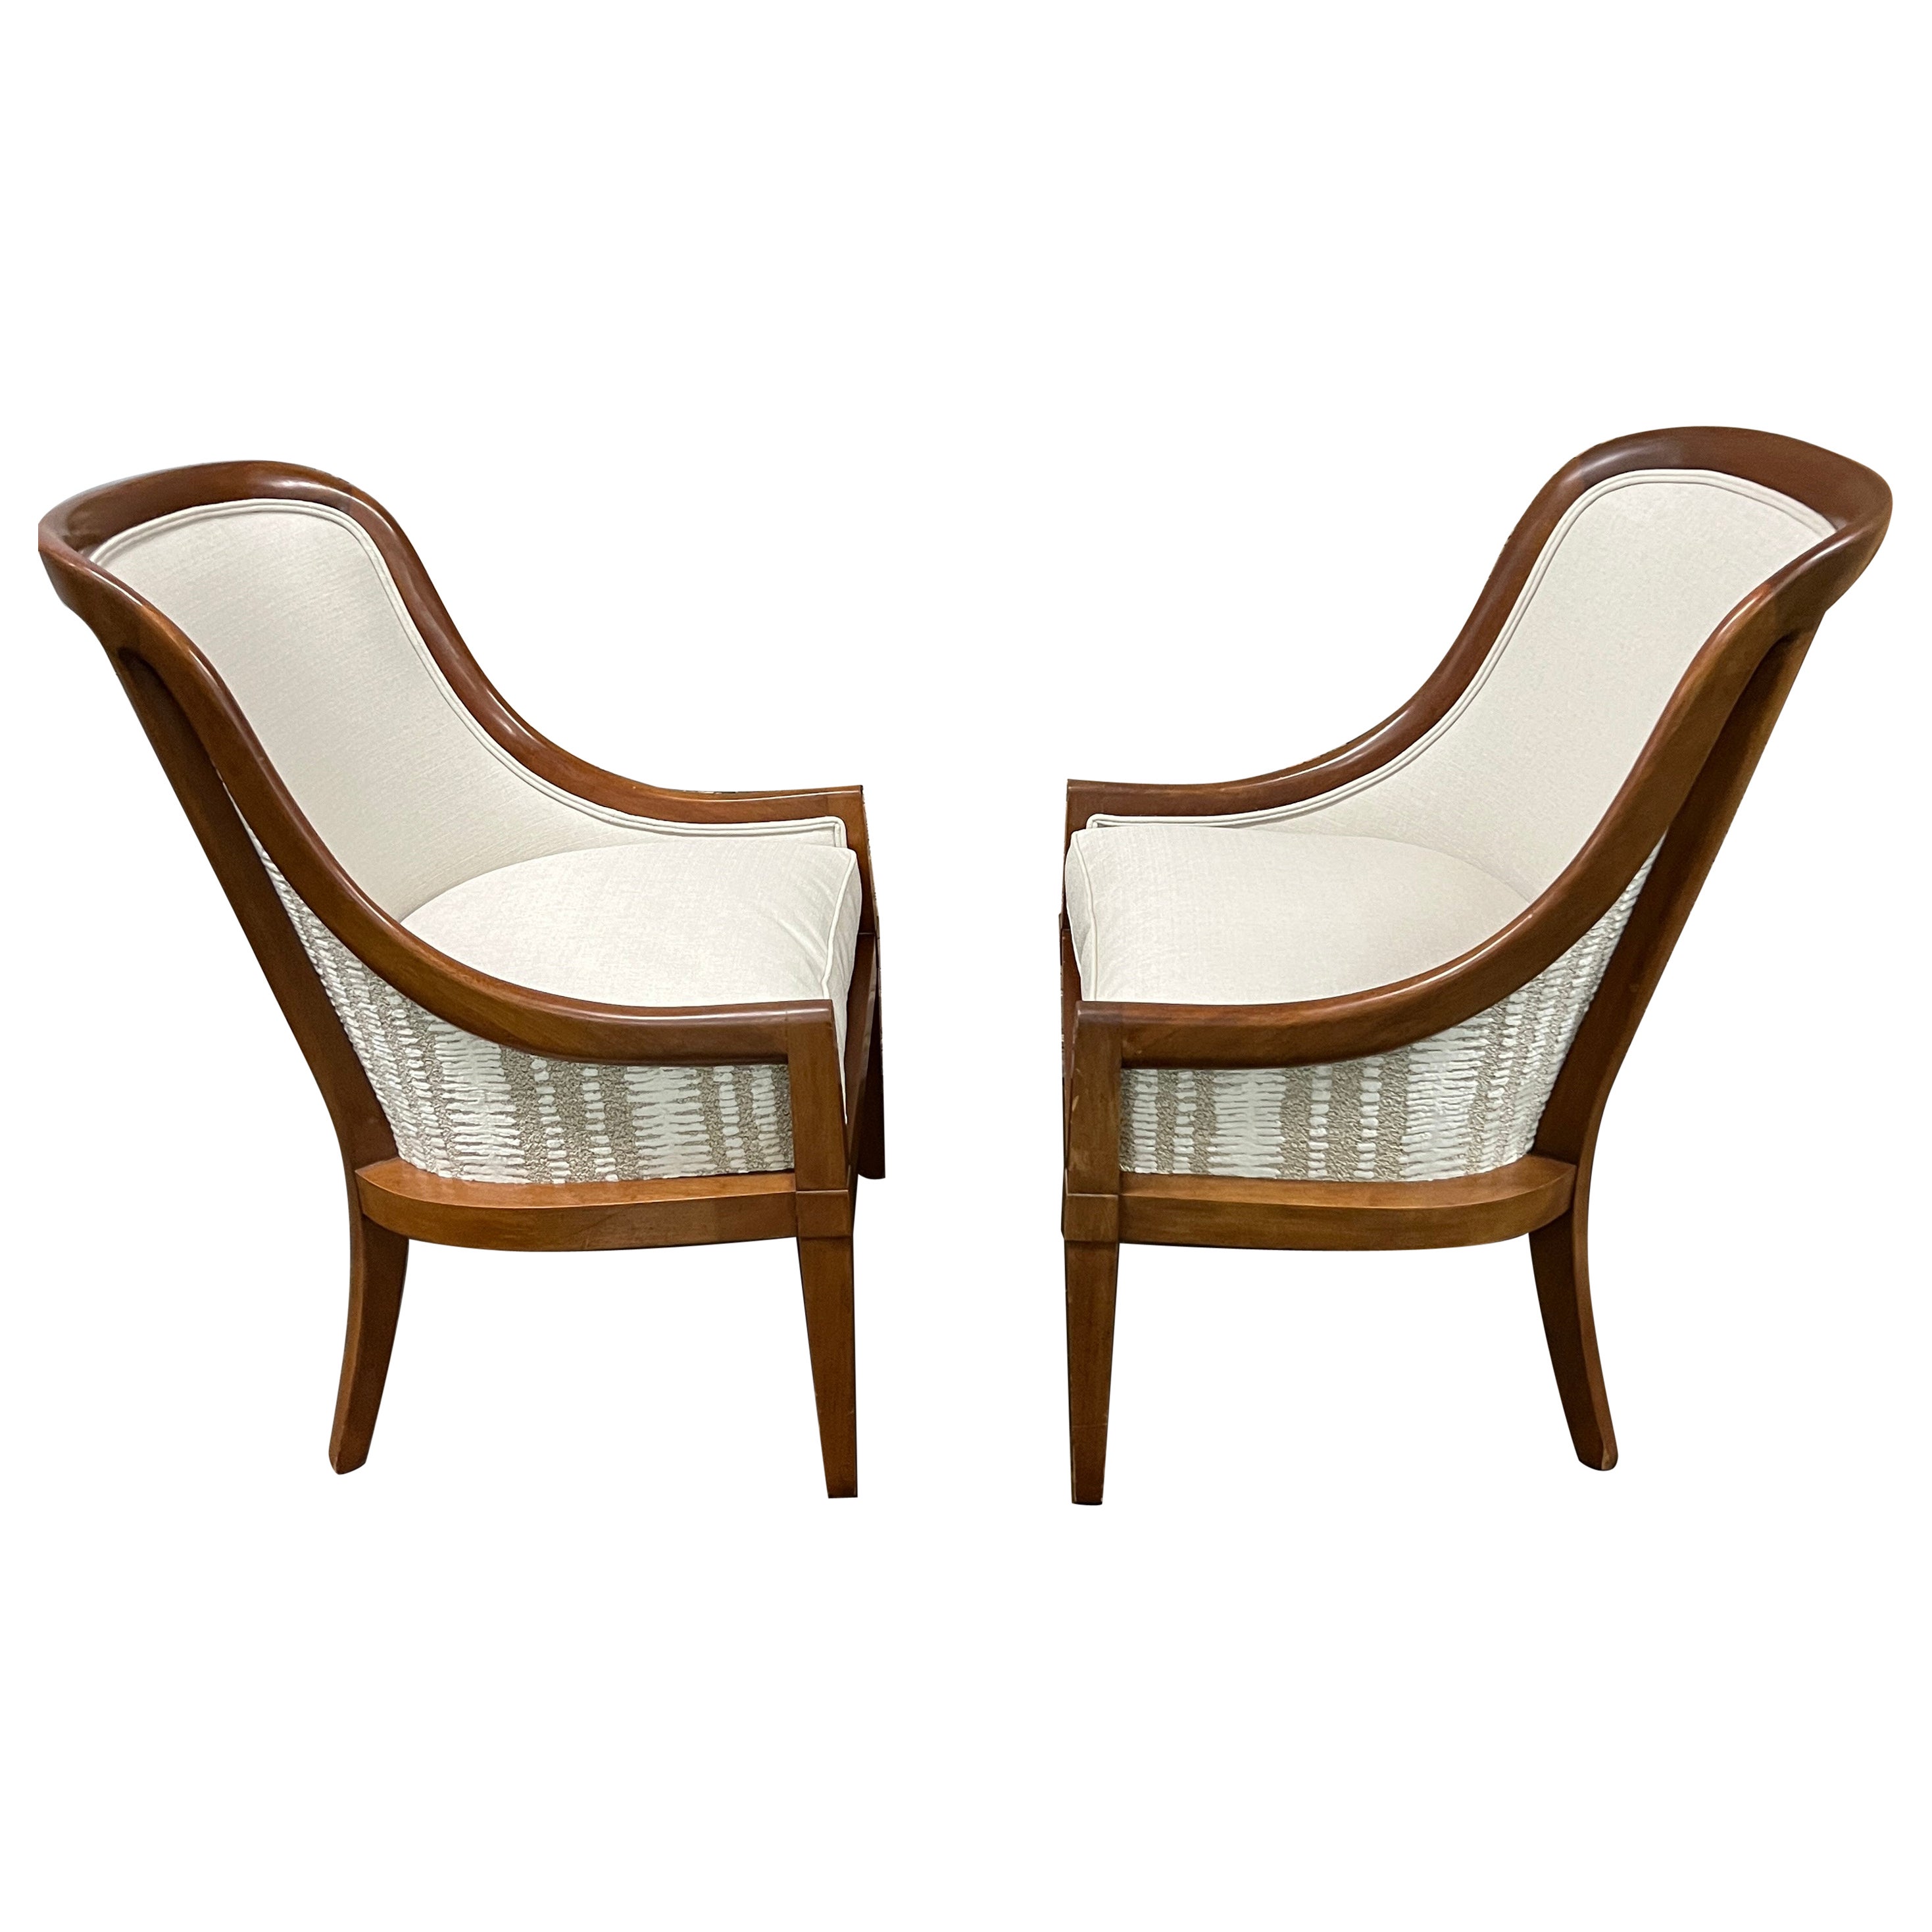 Pair of 1940's Spoon Back Lounge Chairs with Walnut Frames